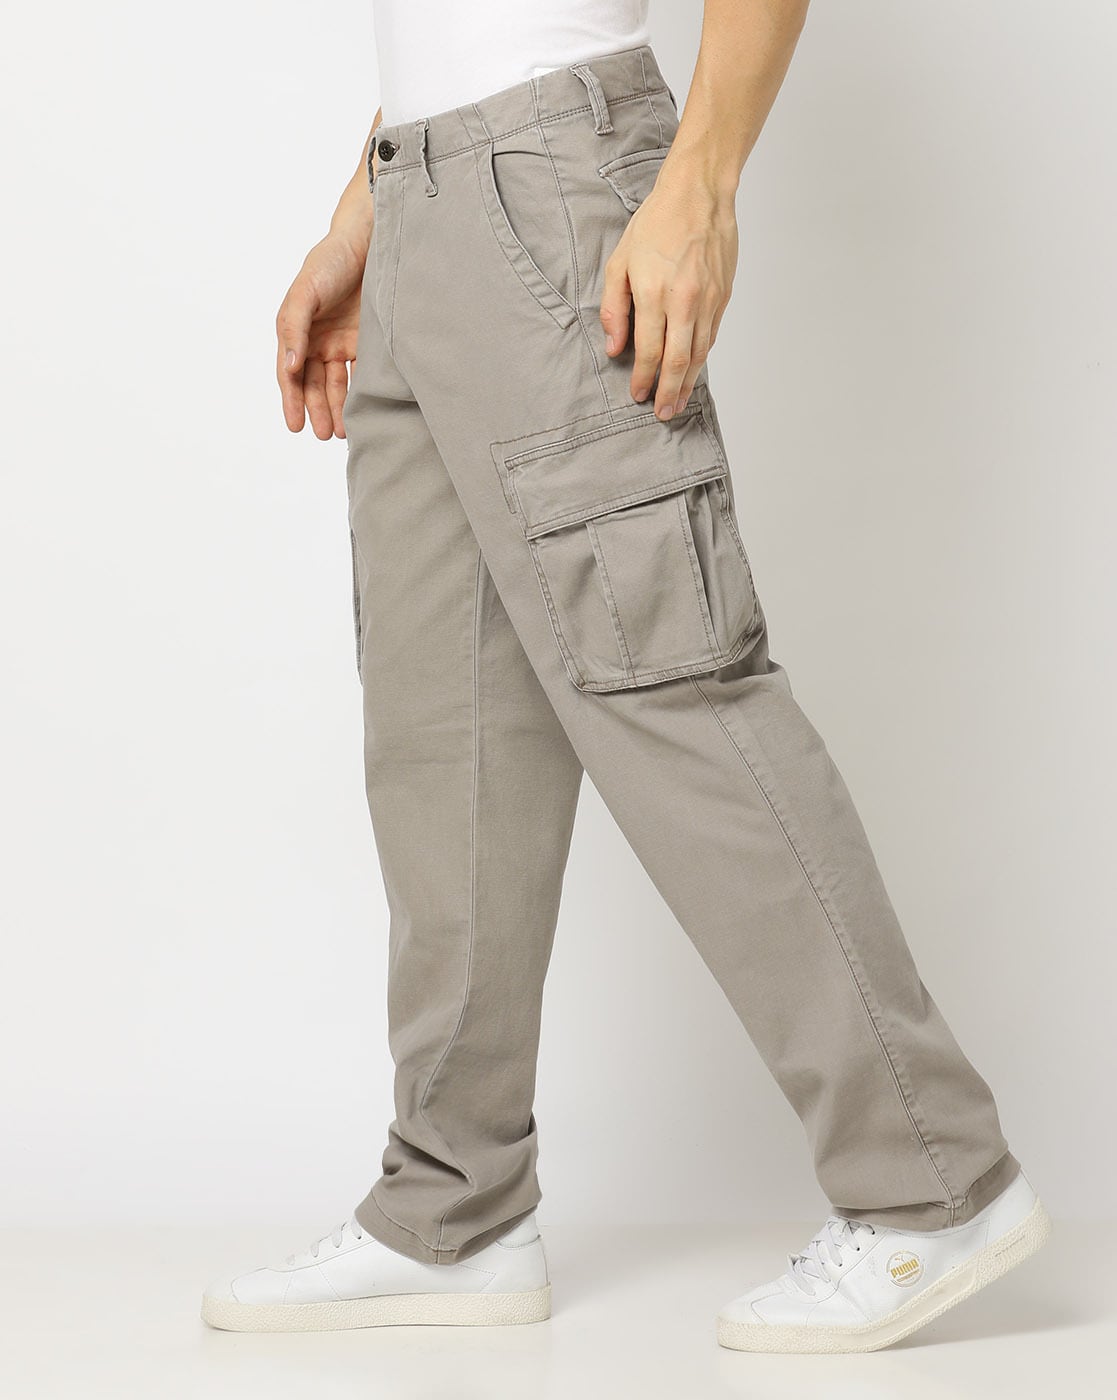 Share 224+ gap cargo trousers mens latest